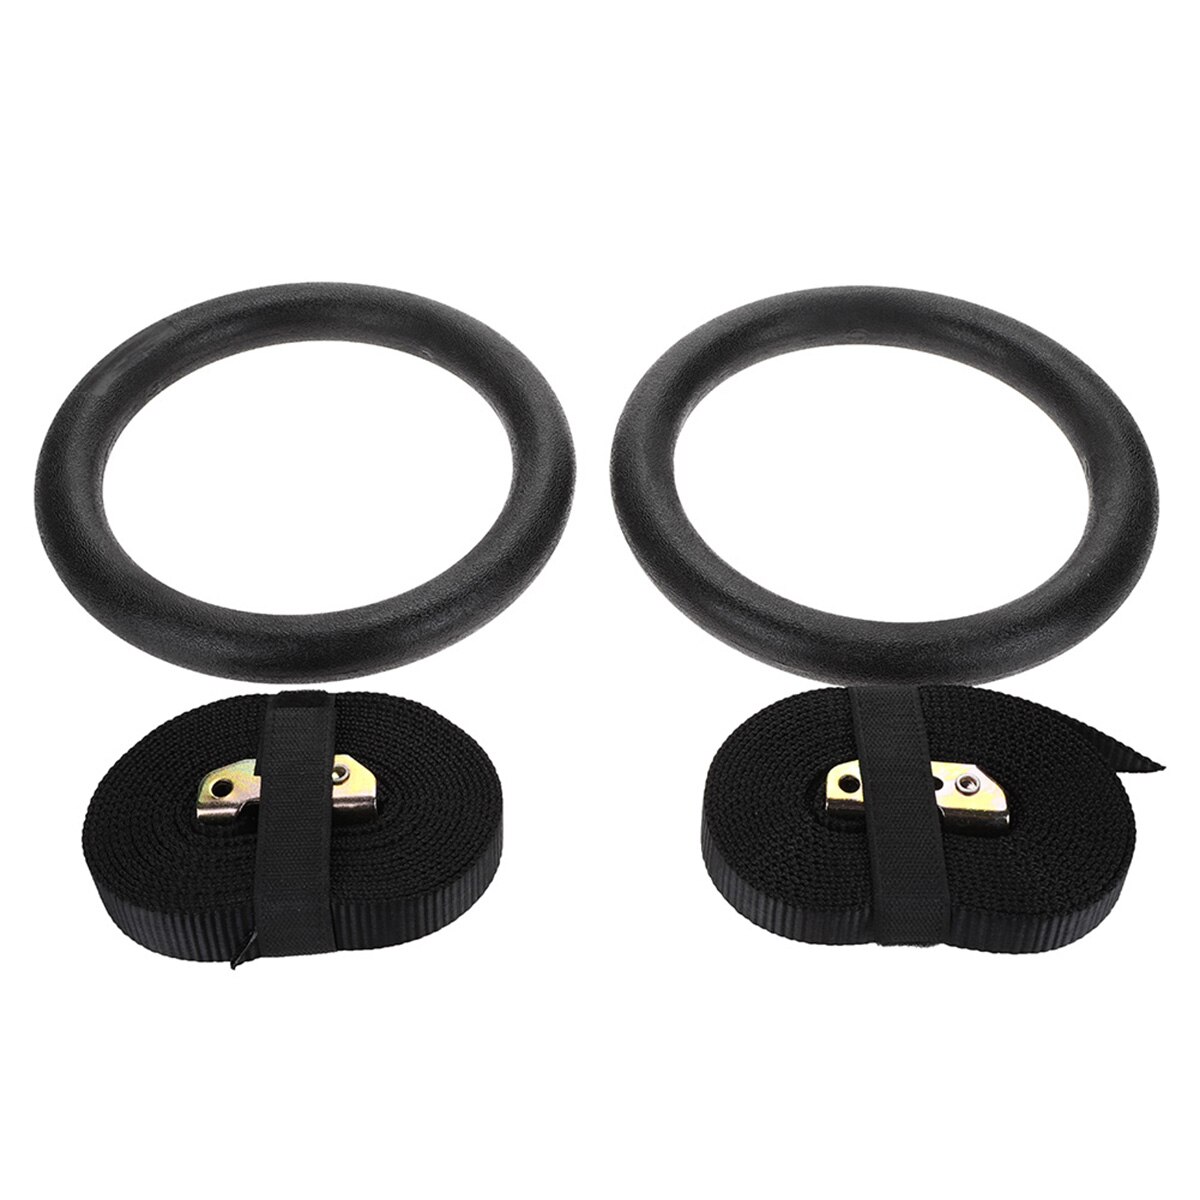 Gymnastic Gym Rings Black Adjustable Fitness Muscle Fitness Rings Strength Training Straps Hoop Fitness Equipment Fast